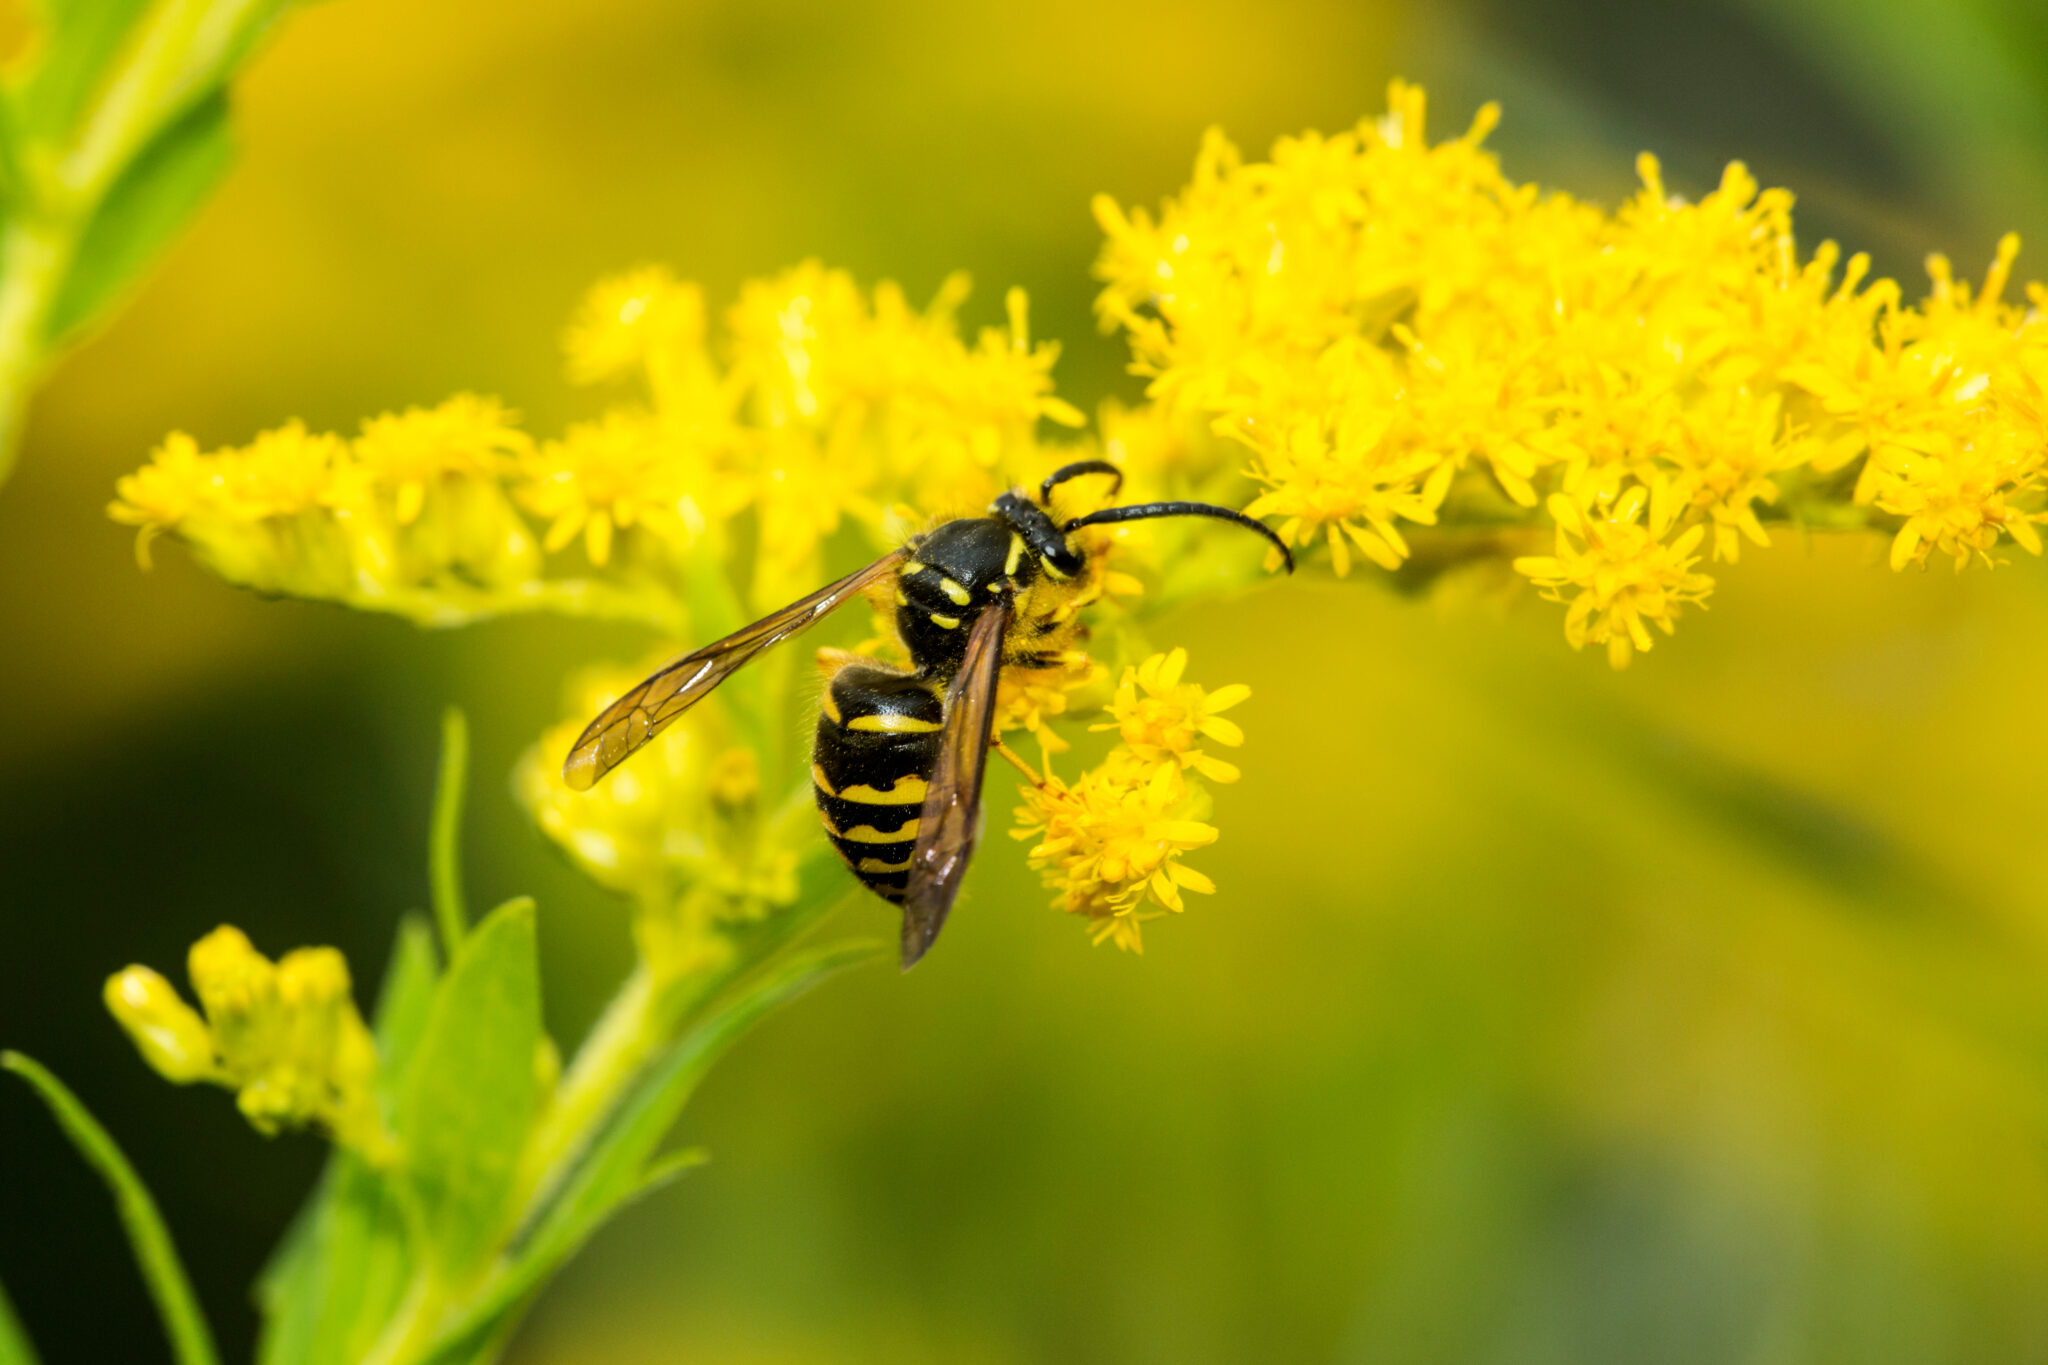 European wasp on a yellow flower